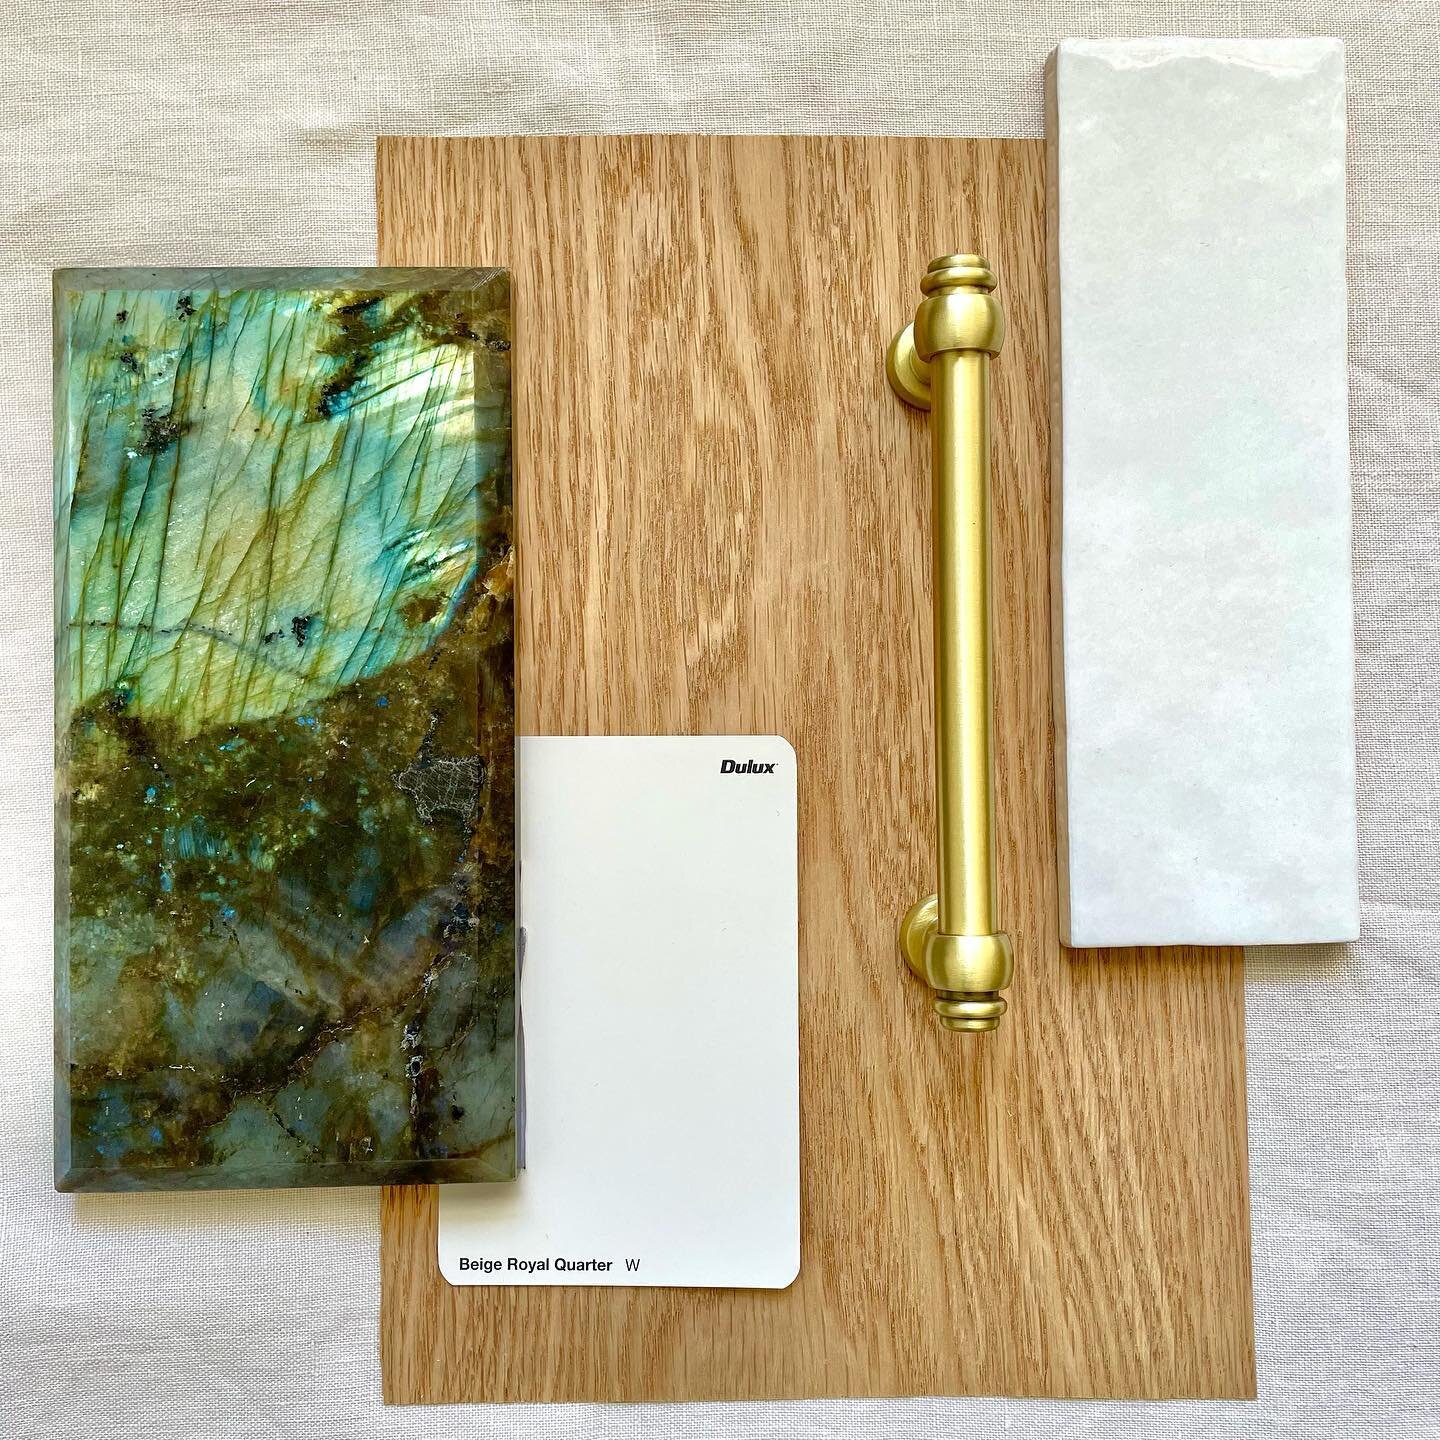 Material selection for a traditional style kitchen. The semi-precious labradorite crystal within the granite for as a bench top is going to be a statement! 💎